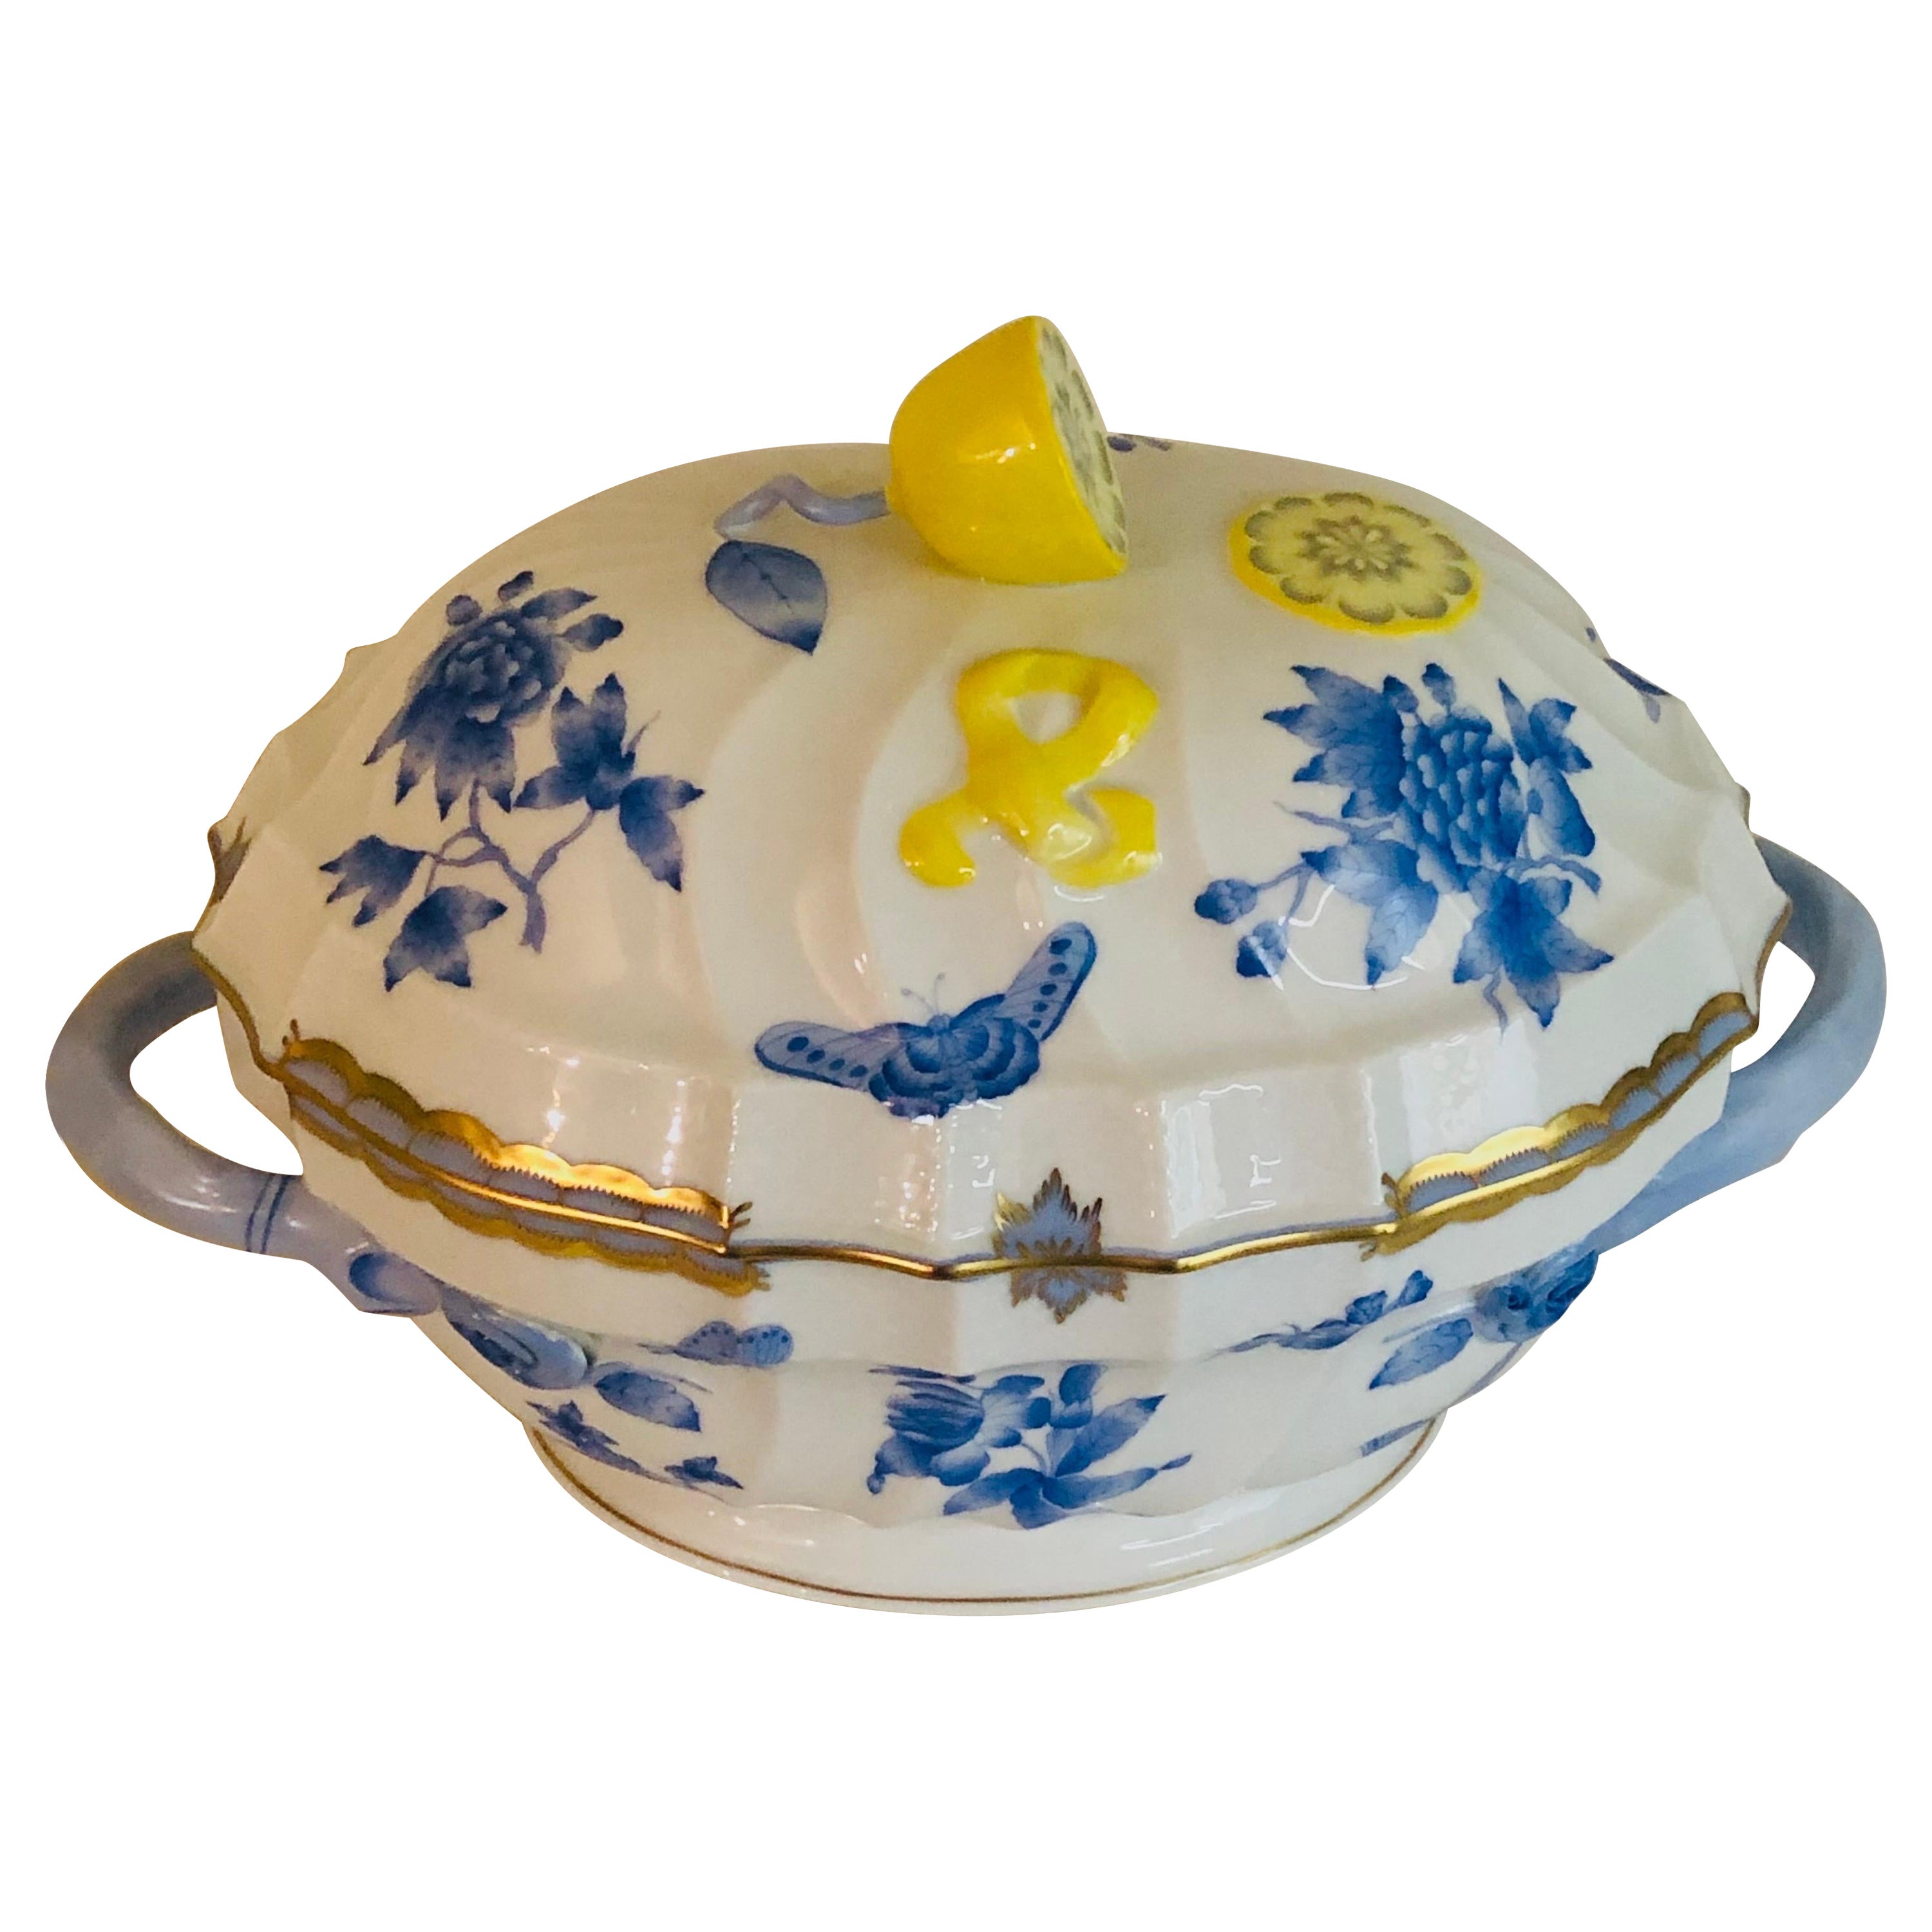 Herend Fortuna Soup Tureen Painted With Butterflies & Flowers & A Lemon on Top